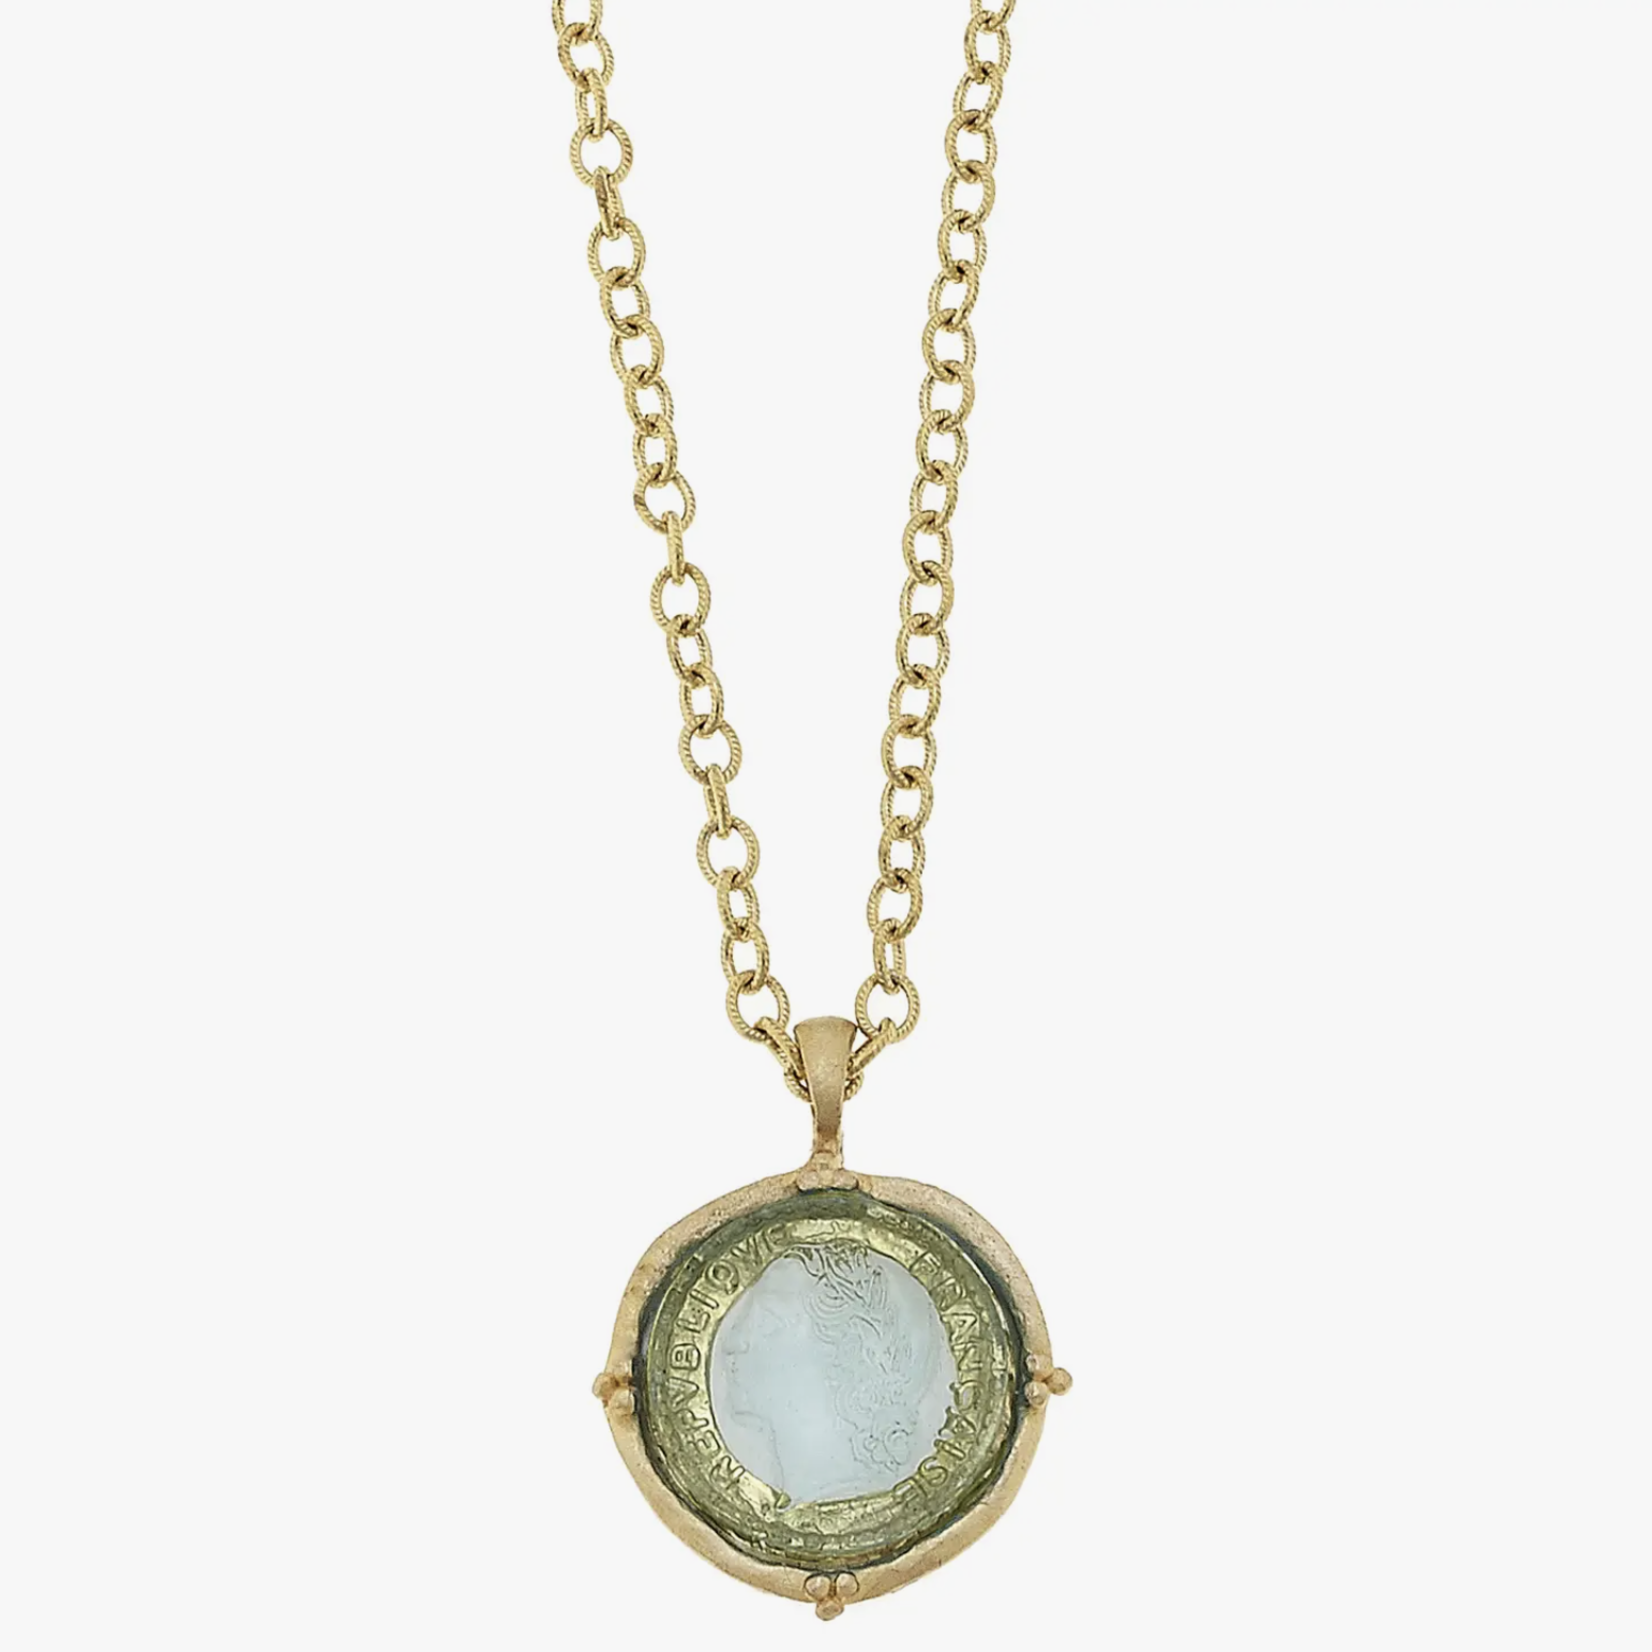 Susan Shaw Long Venetian Clear Glass Coin Intaglio Necklace